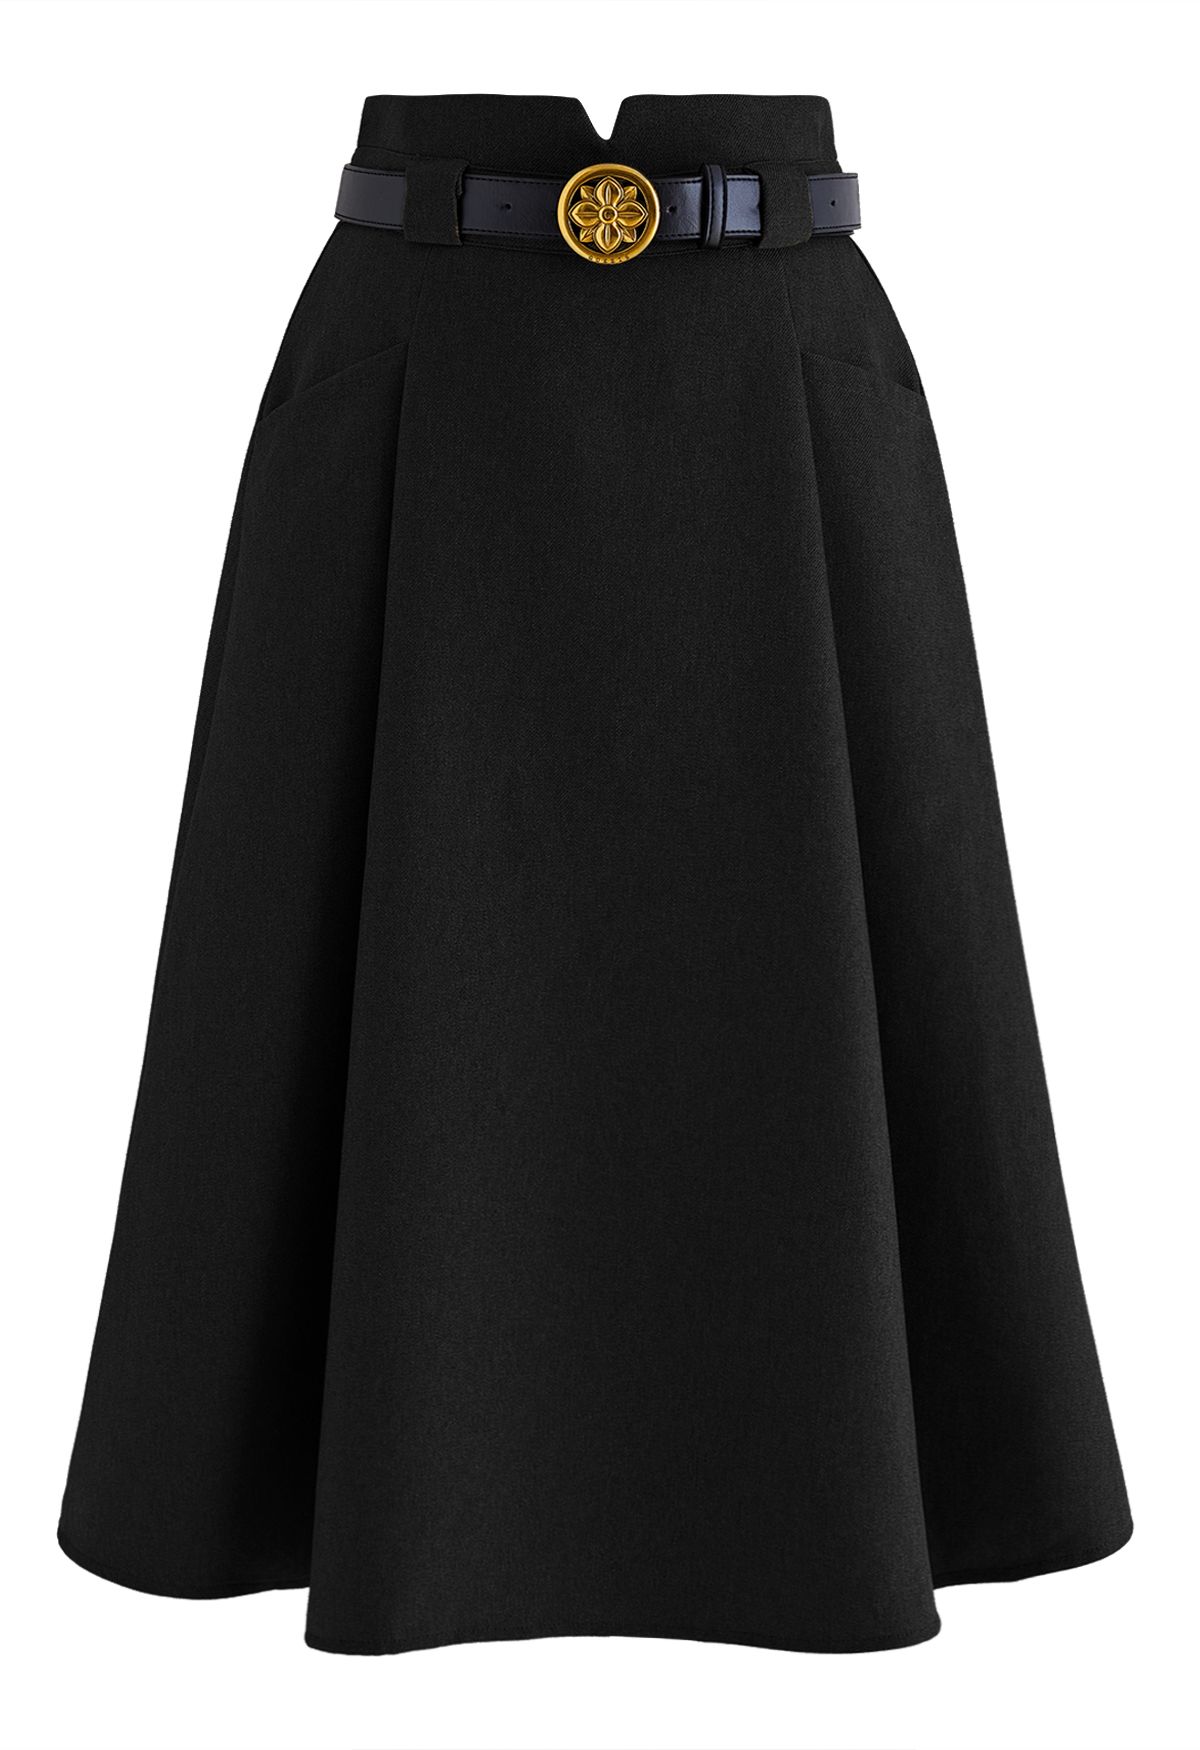 Belted Front Pocket Pleated Midi Skirt in Black